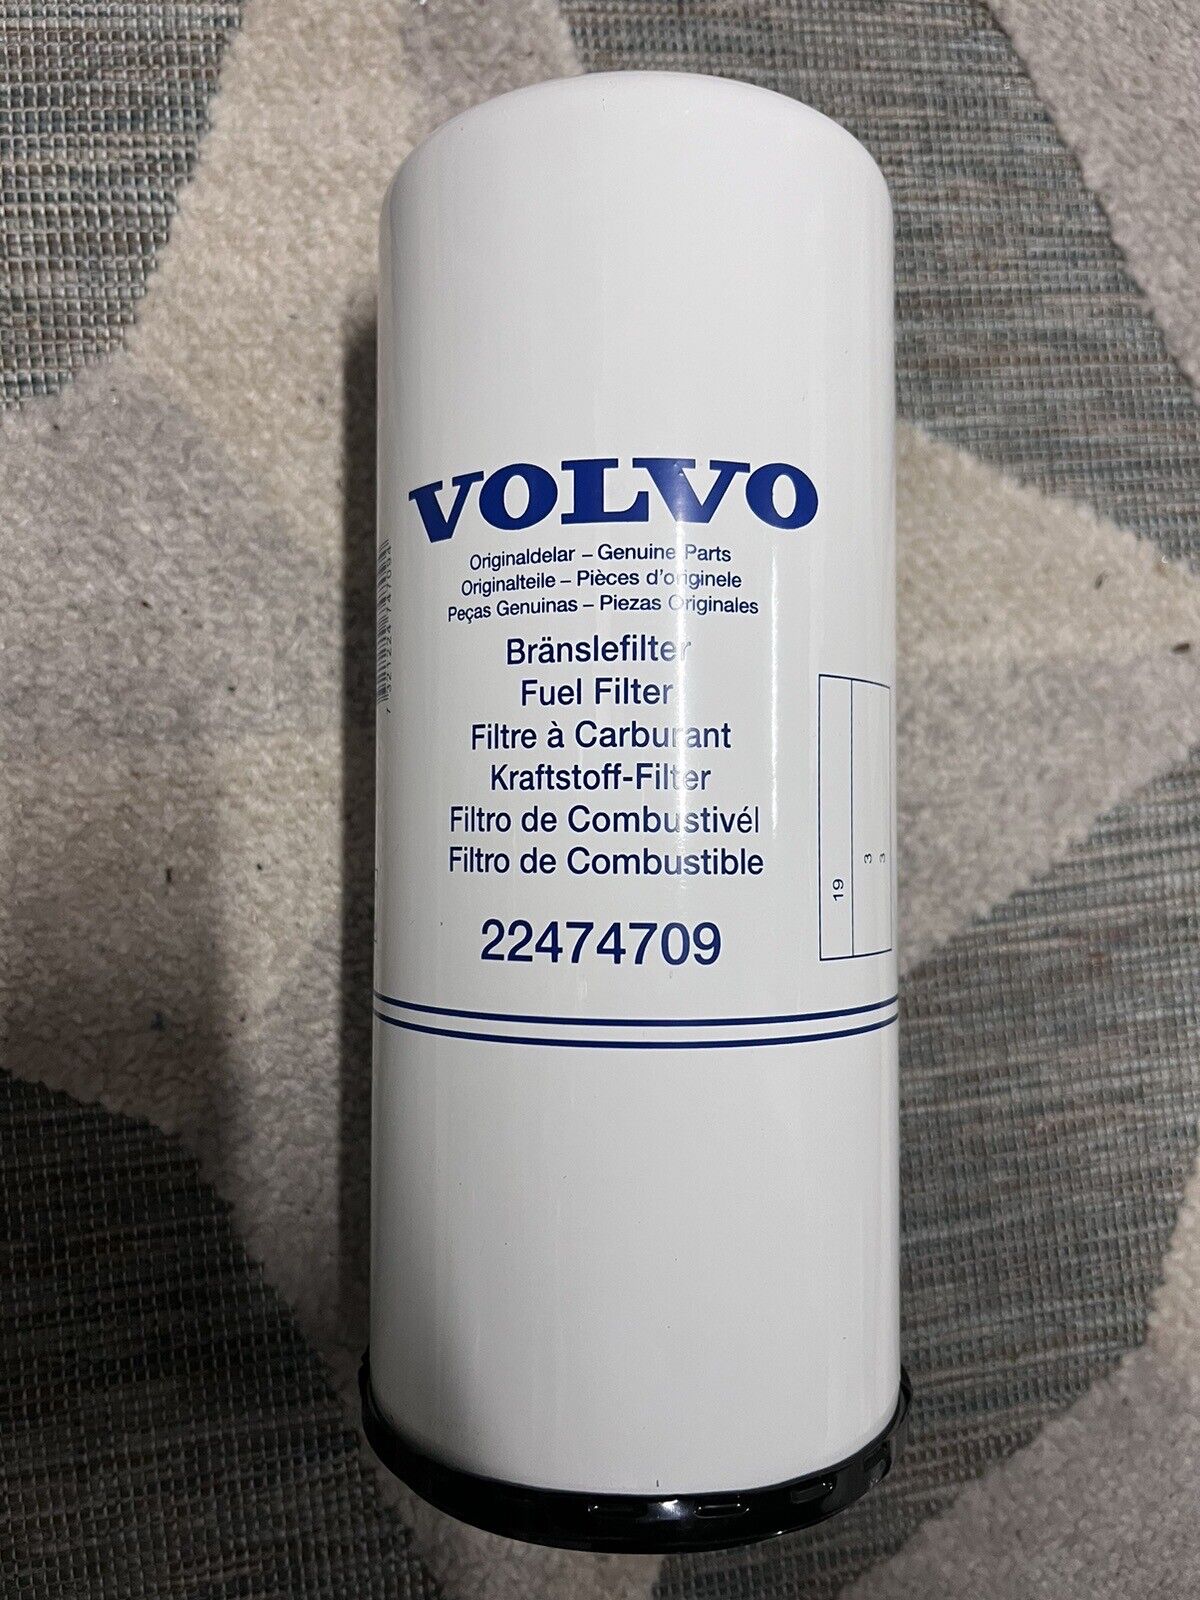 22474709 NEW GENUINE VOLVO FUEL FILTERS (CASE 8 FILTERS)